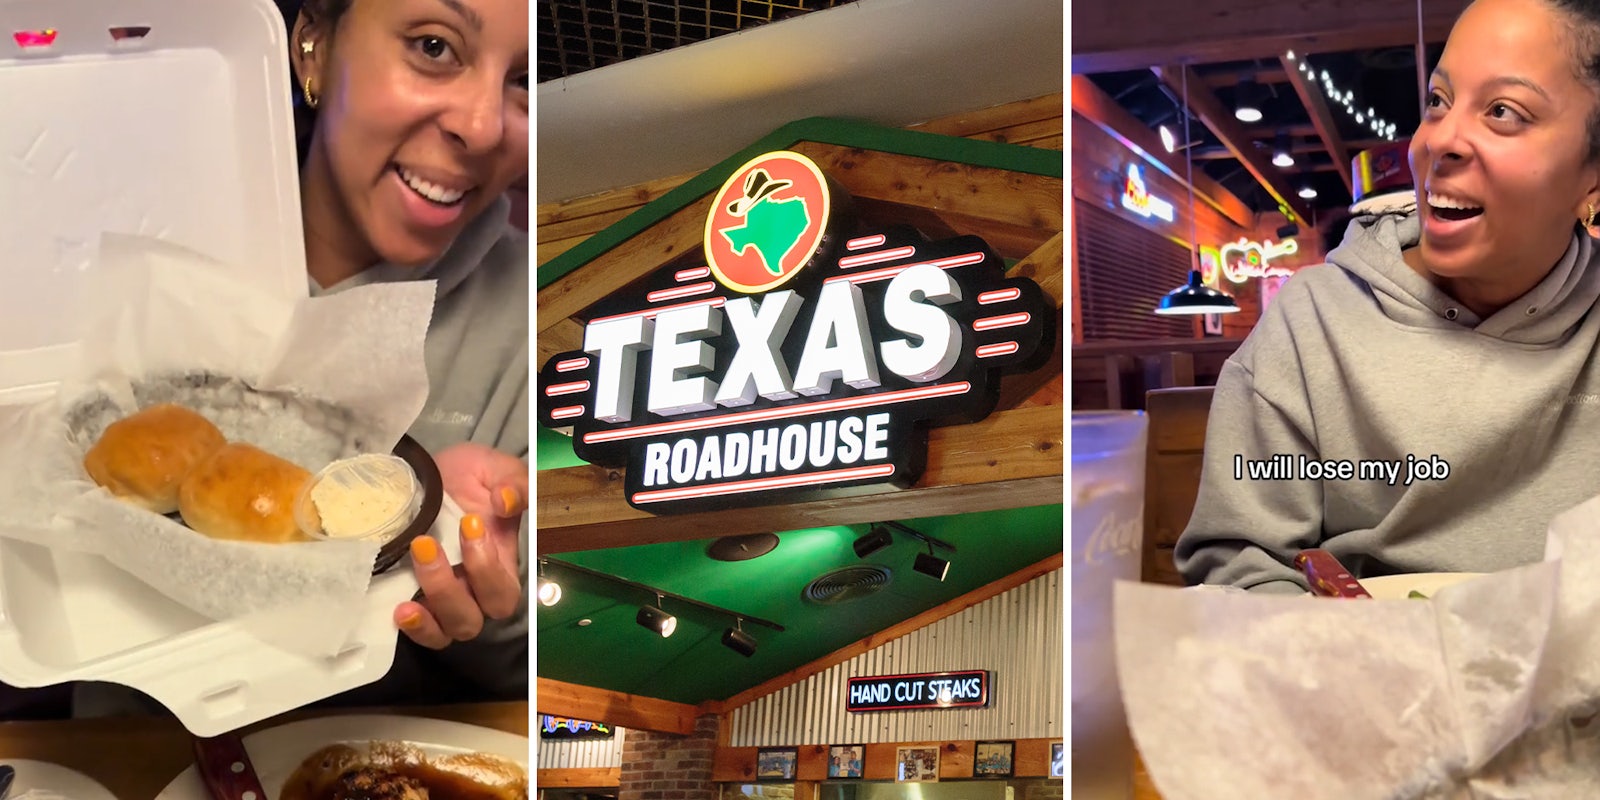 Texas Roadhouse customer asks worker if she can buy bread basket